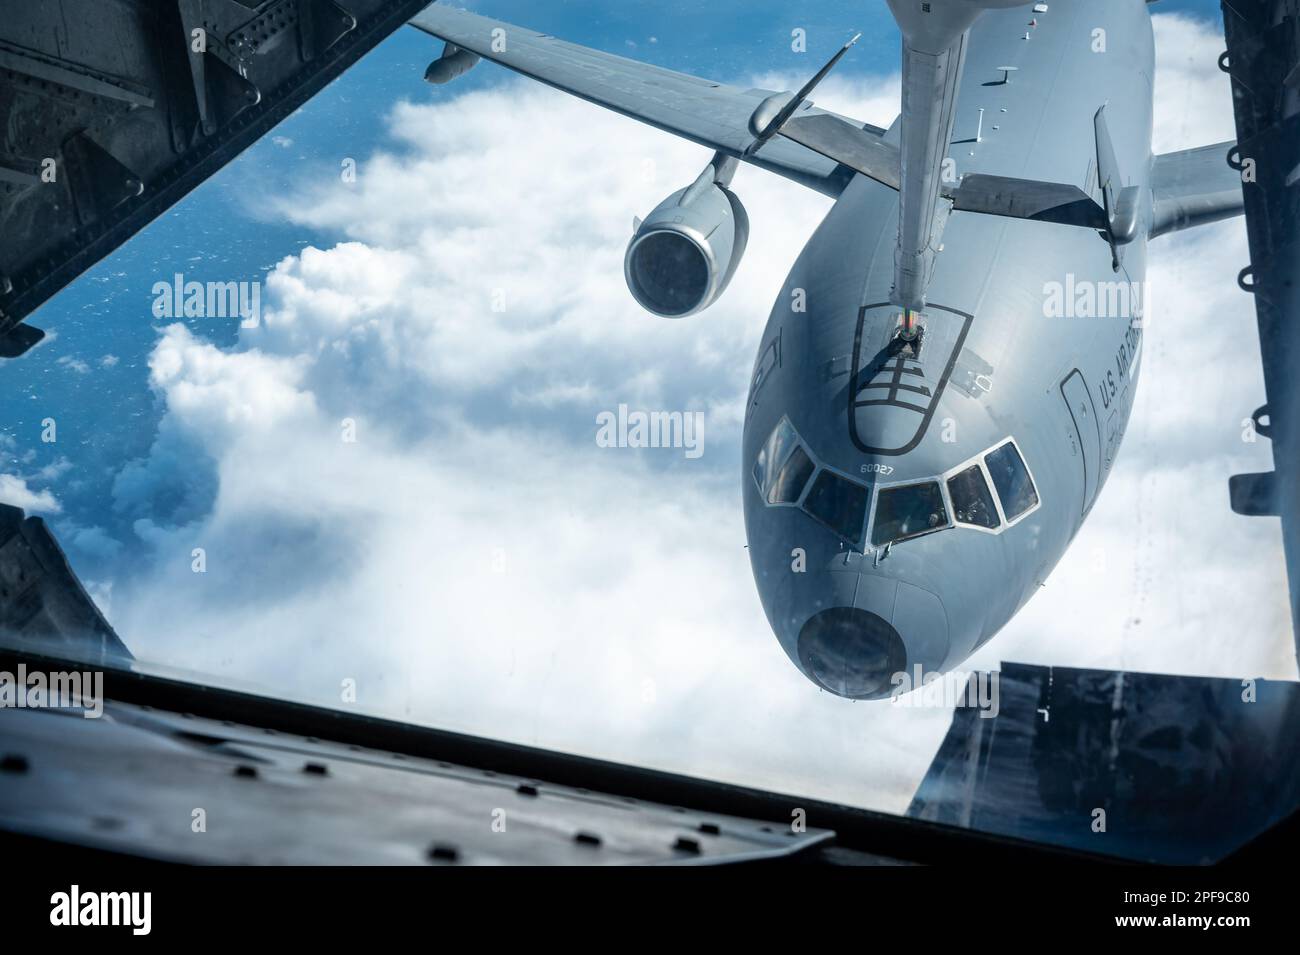 A KC-10 Extender, from the 79th Air Refueling Squadron, attaches to a boom during a simulated refueling training mission over the Pacific Ocean, February 24, 2023. The 79ARS conducted refueling training with KC-10s assigned to Travis Air Force Base, California. (U.S. Air Force photo by Tech. Sgt. Daniel Peterson) Stock Photo